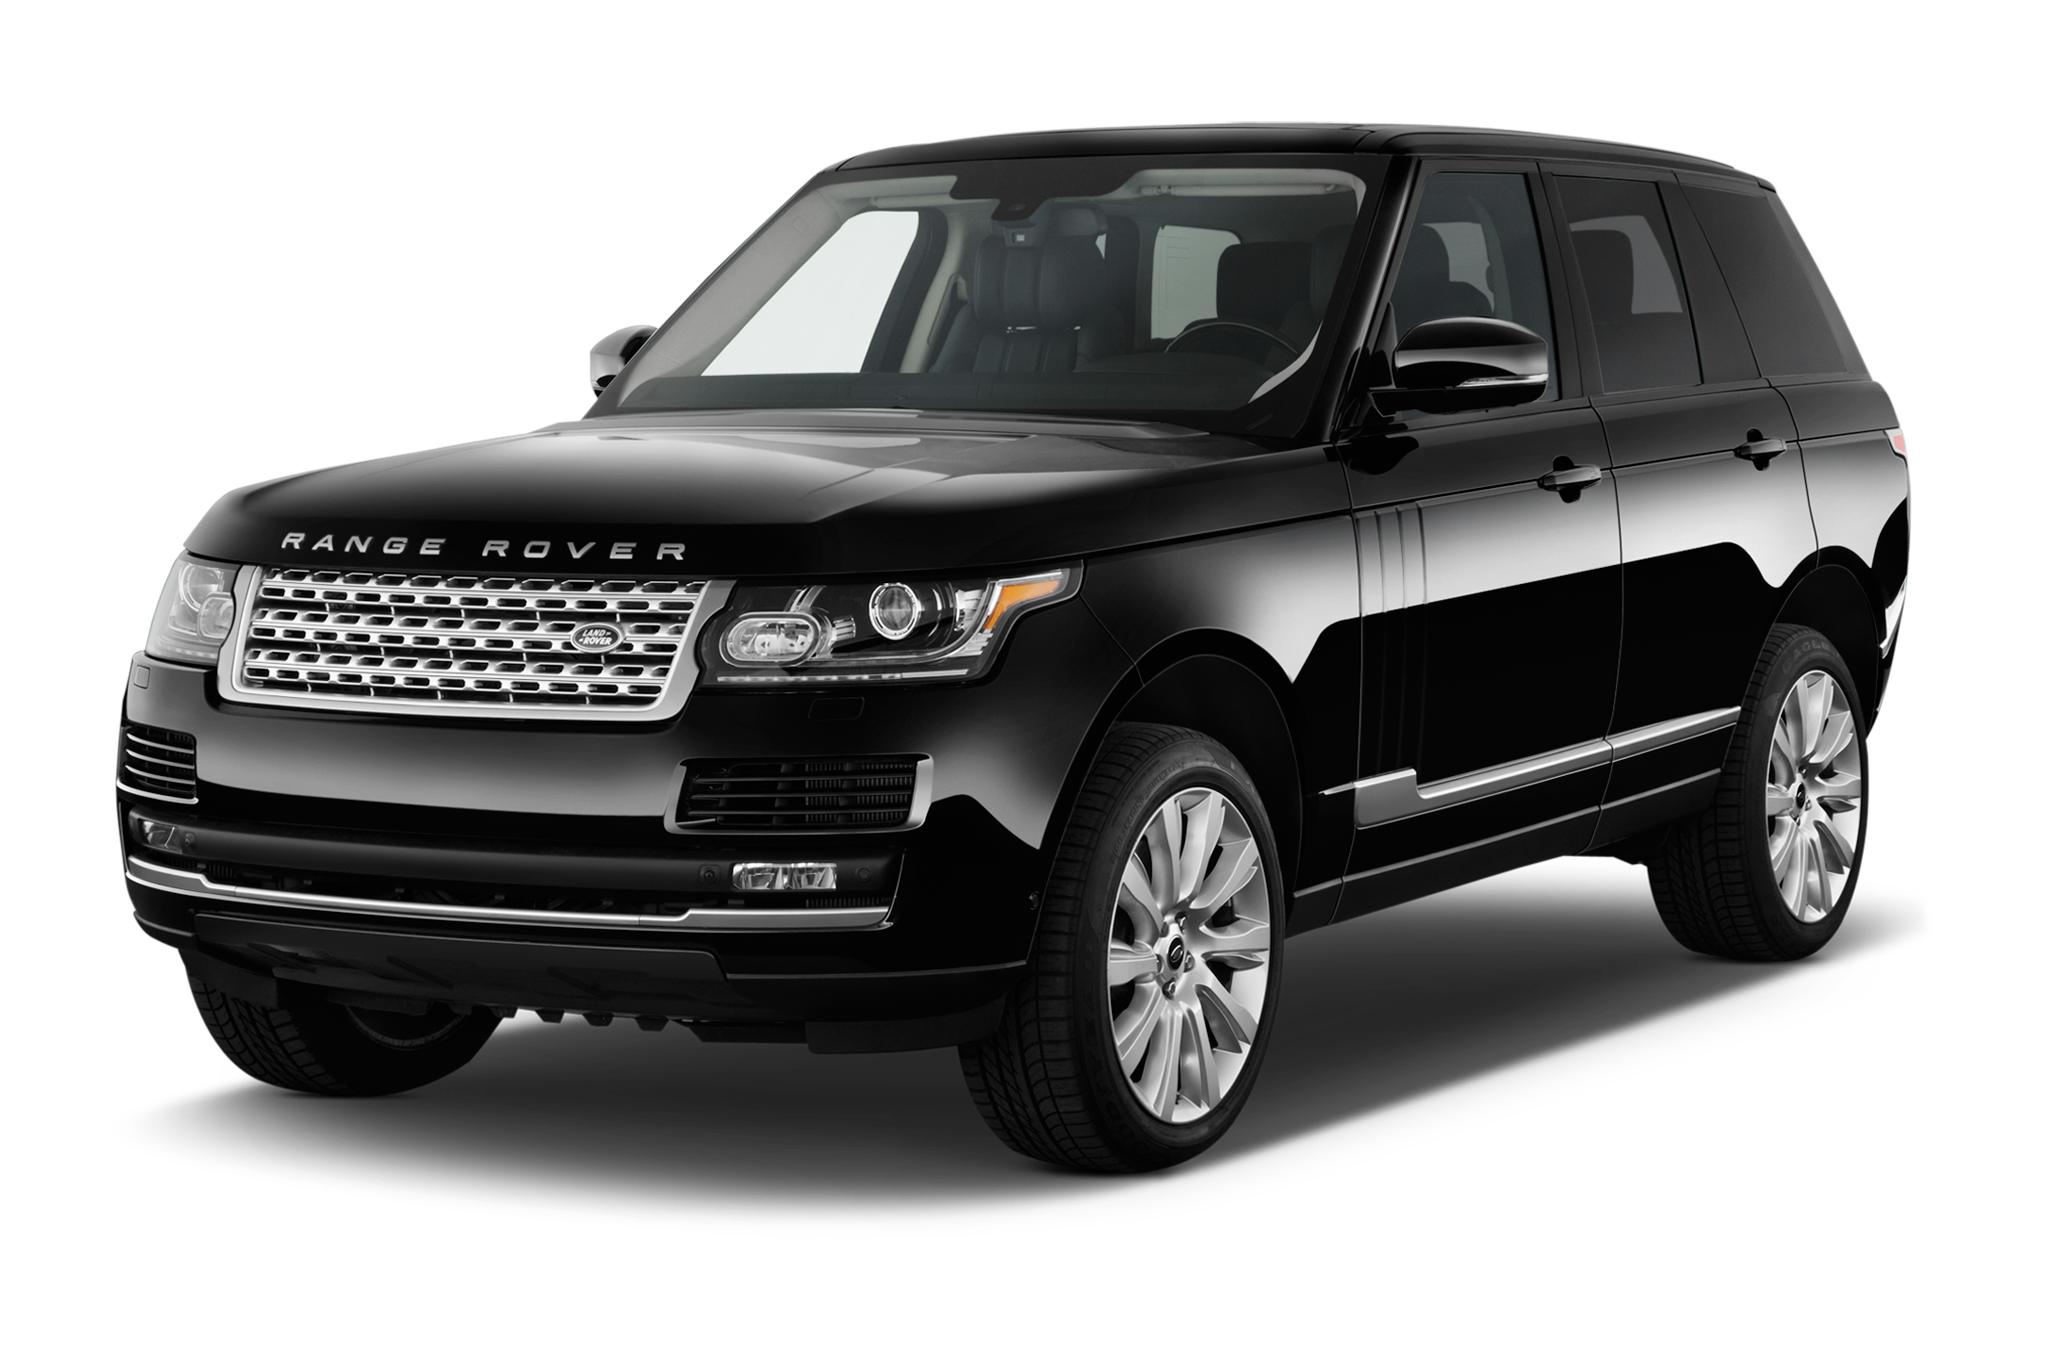 HQ Land Rover Wallpapers | File 1456.07Kb